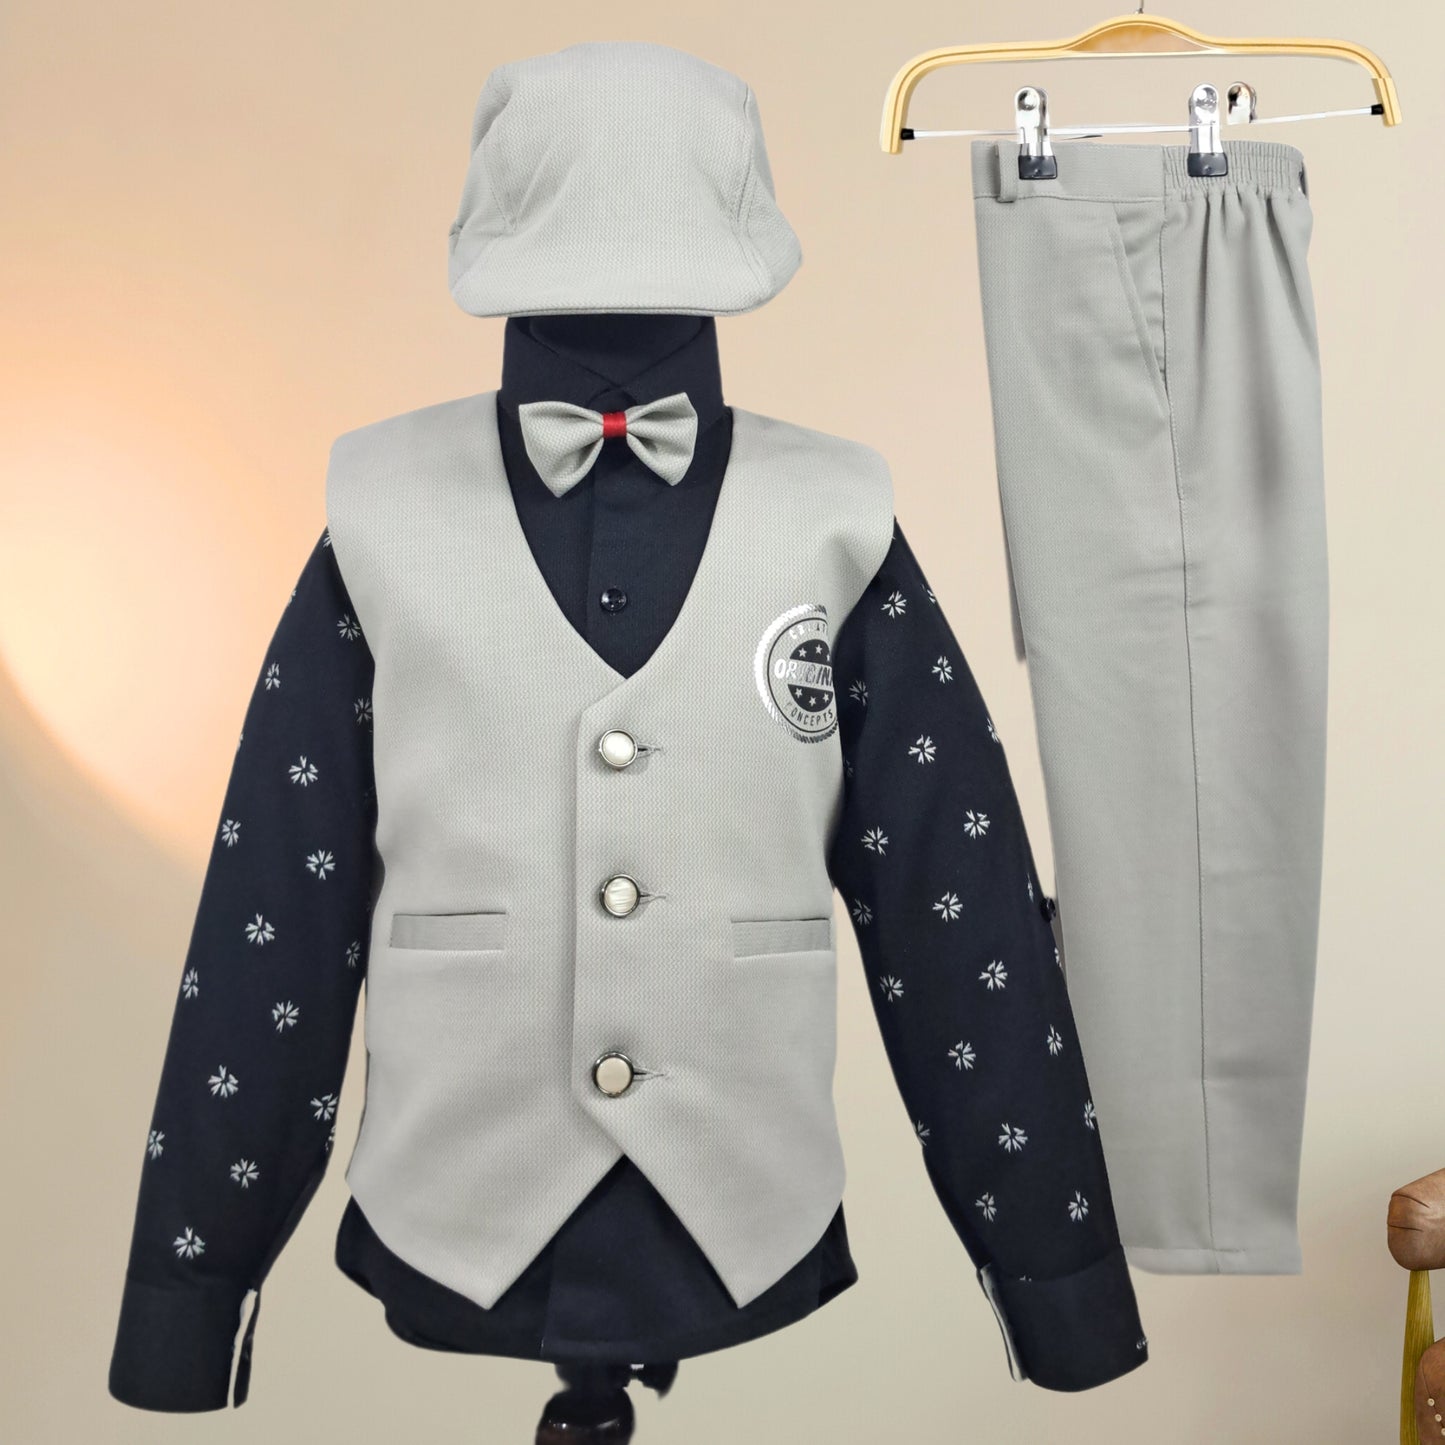 Grey and Black Lycra Full Sleeves Party Suit With Suspender, Hat and Bow